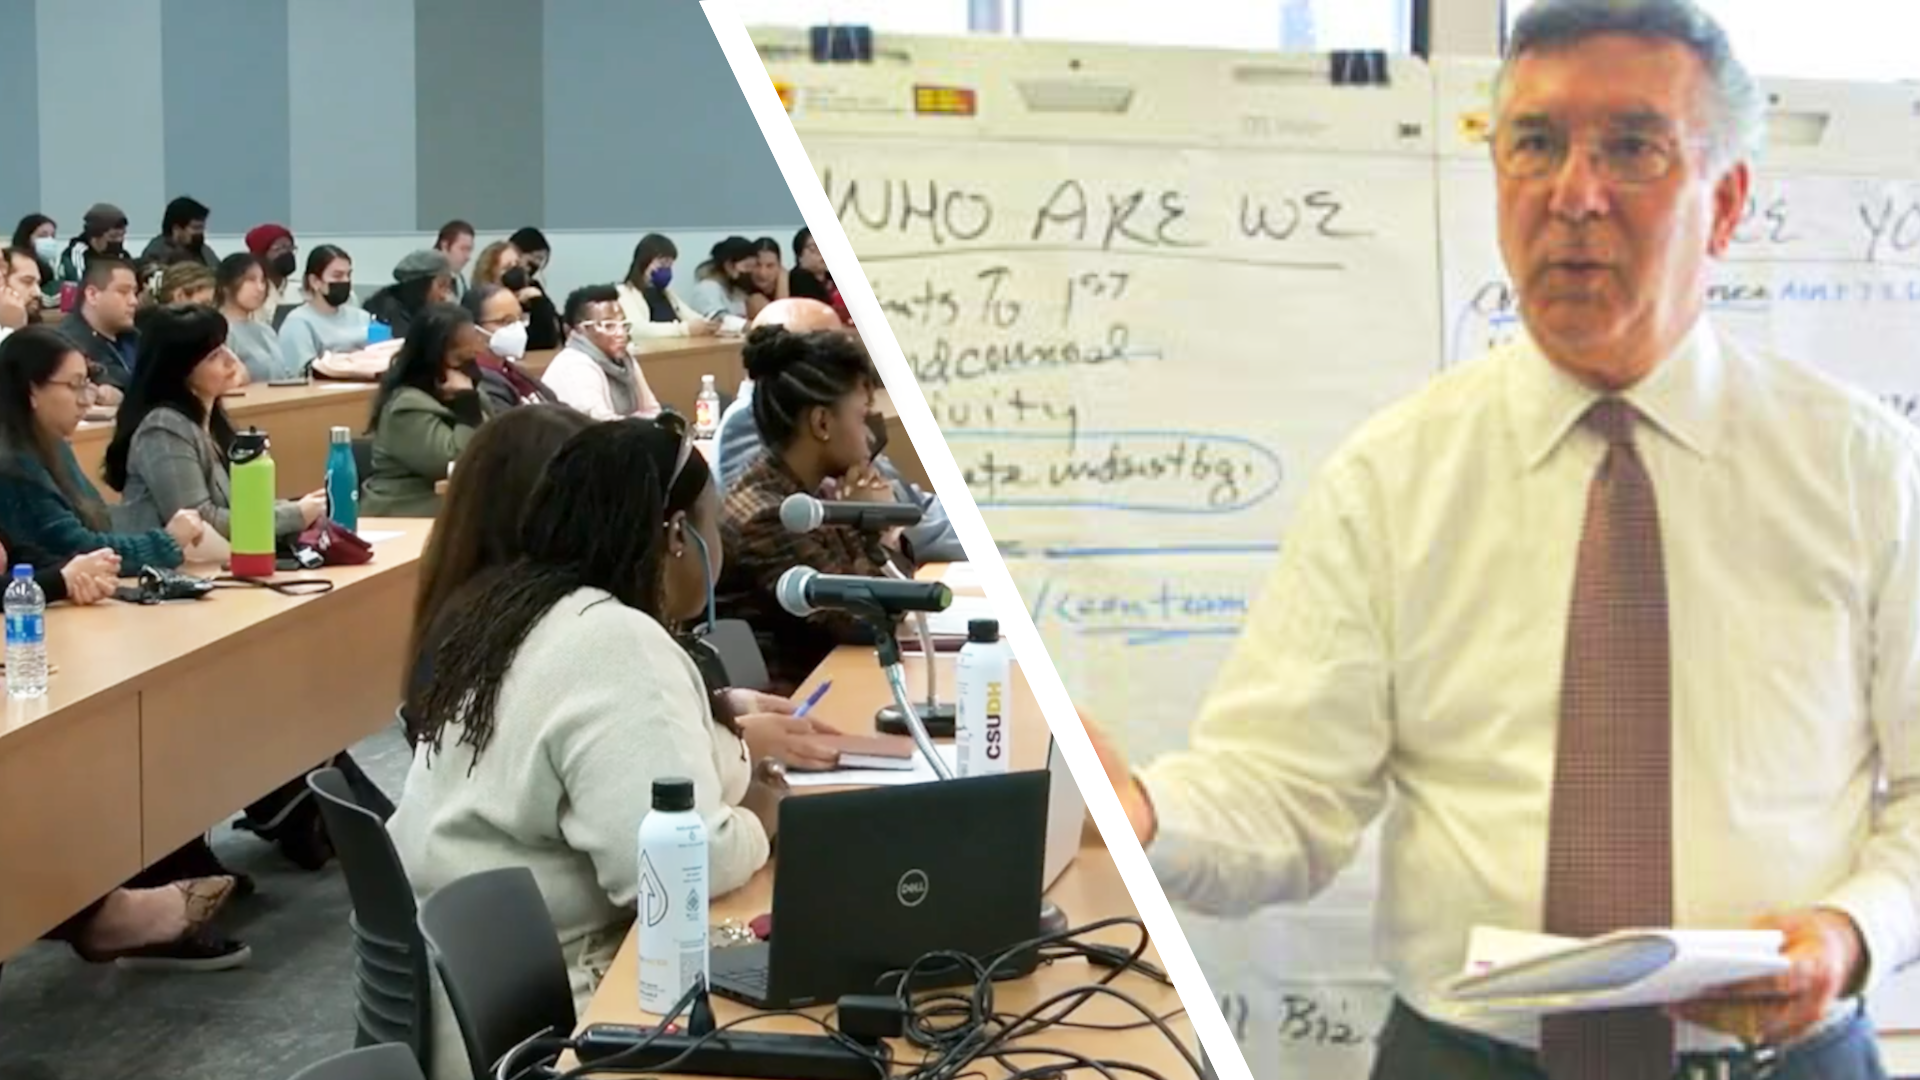 The image is divided in two. On the left: a group of students listening to a seminar. On the right: Dr. Allan Colman speaking in front of a whiteboard.